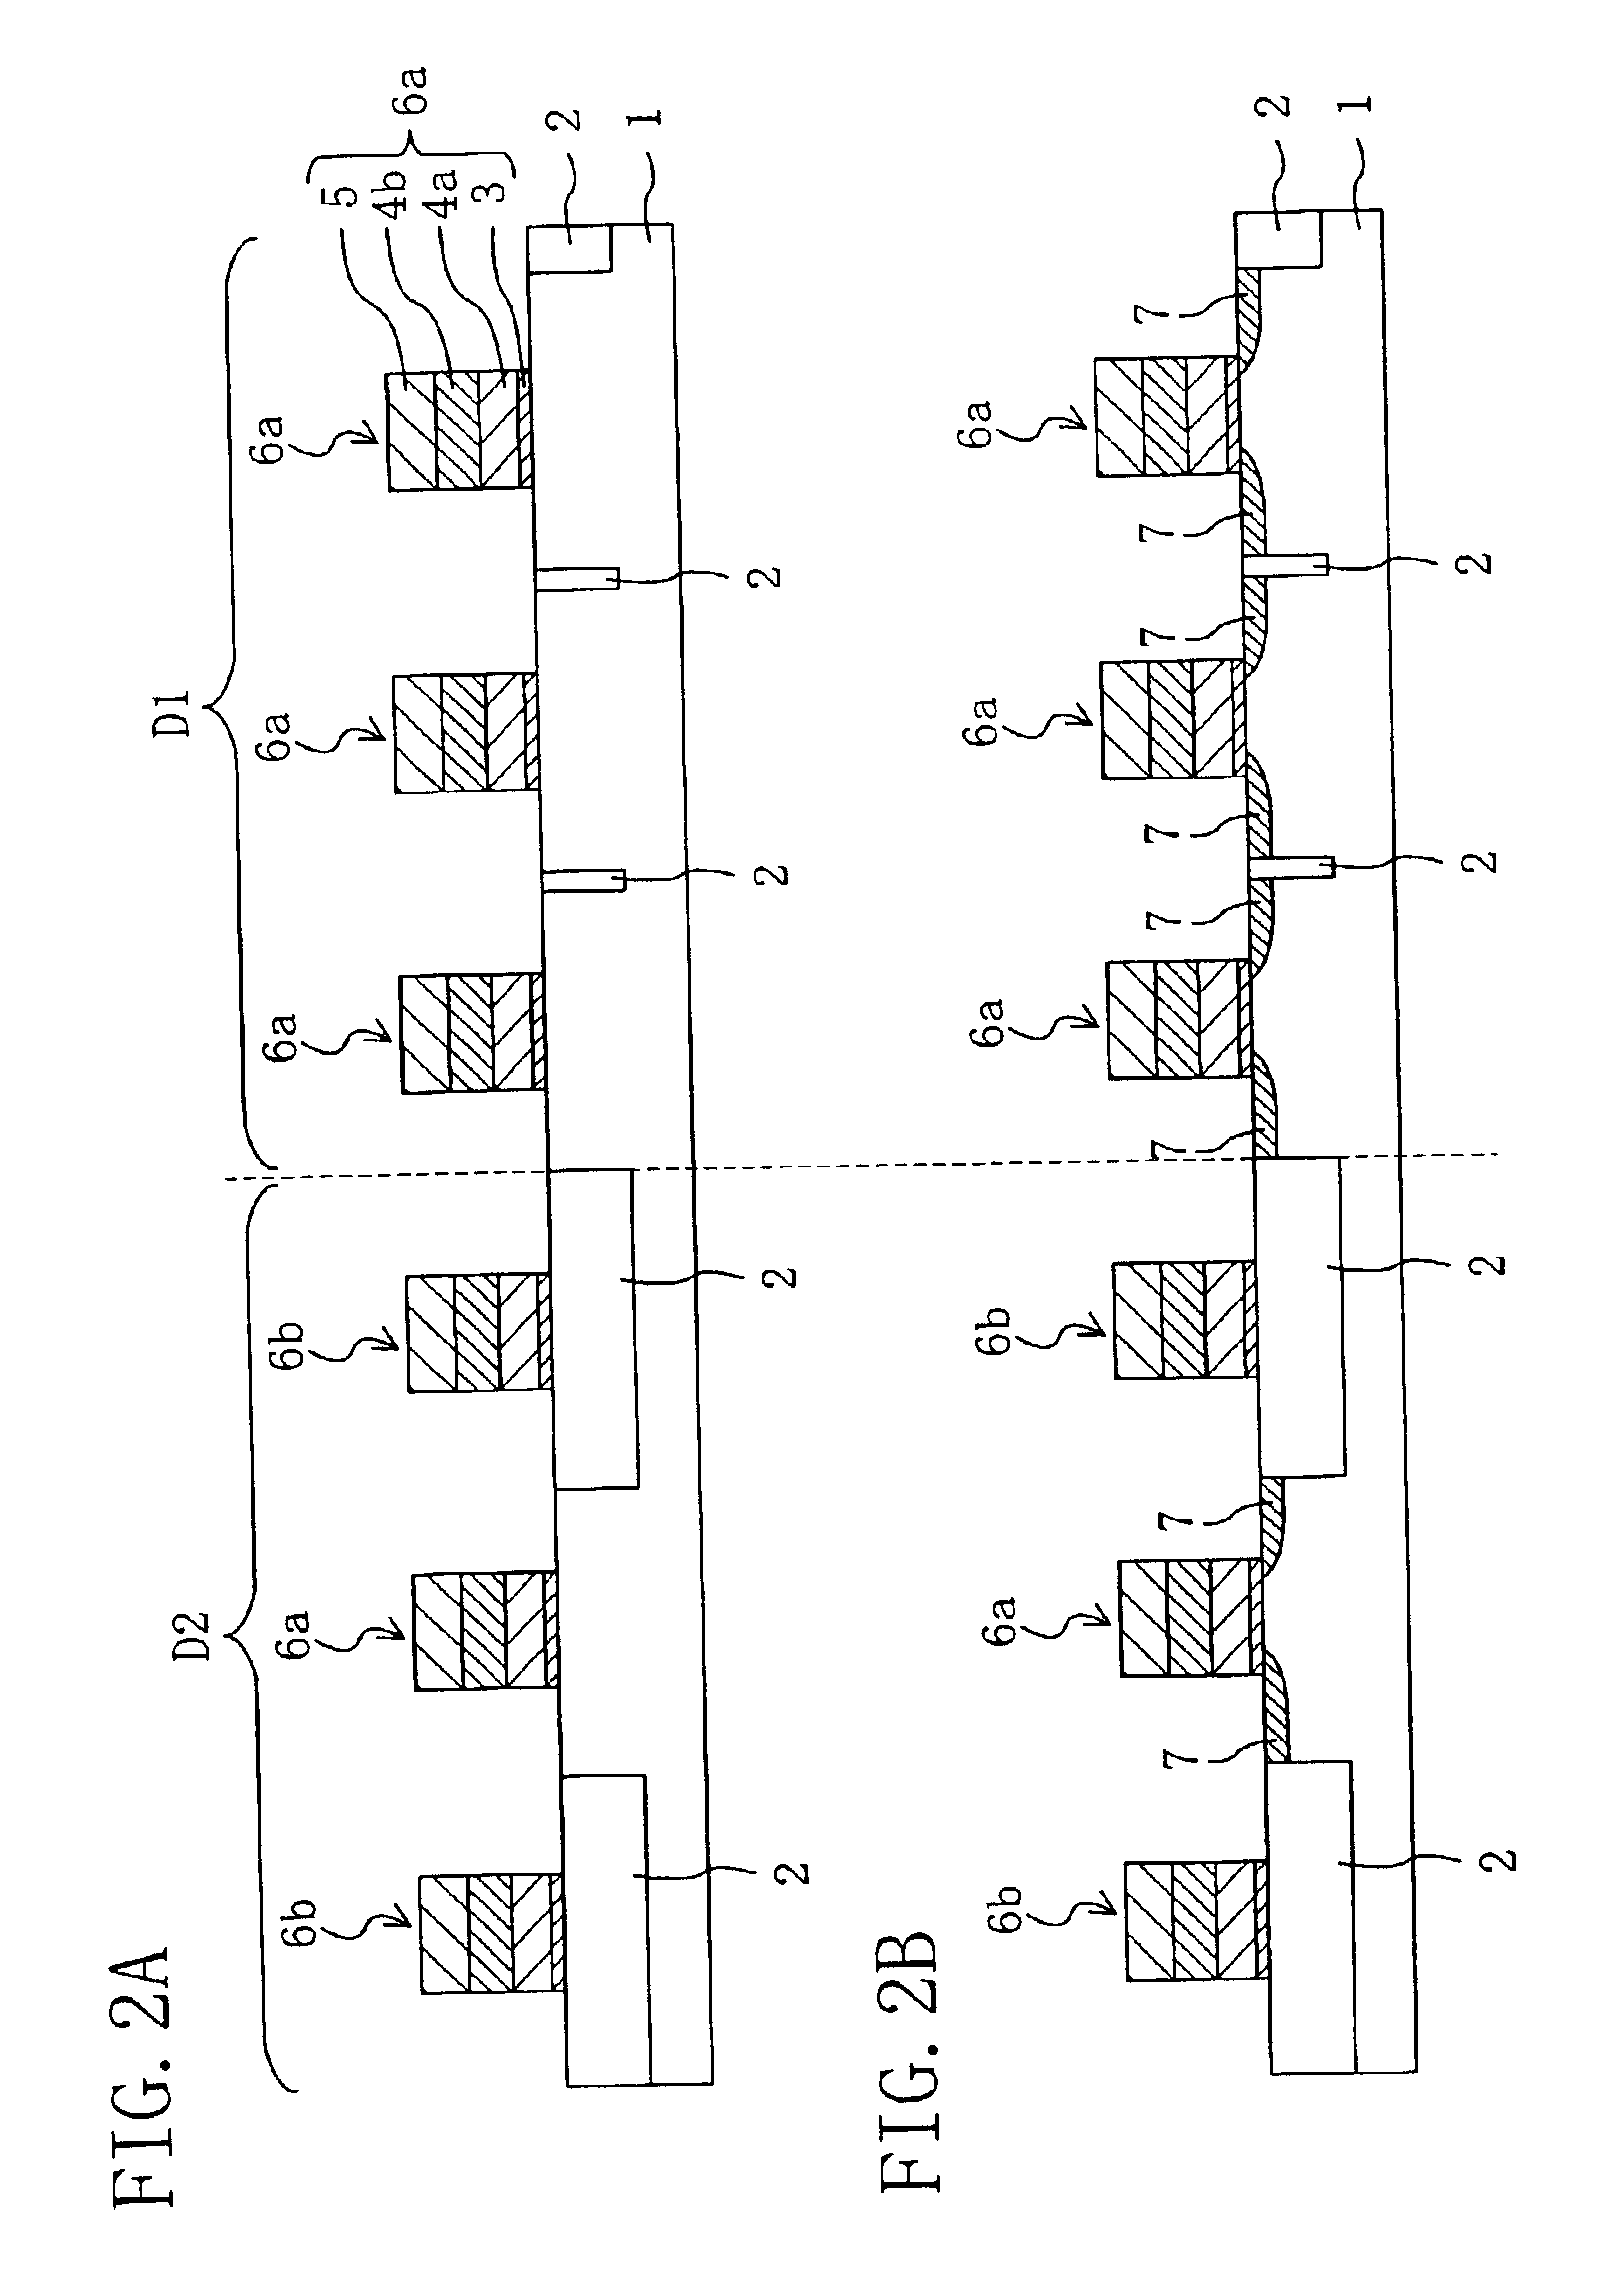 Semiconductor device utilizing dummy features to form uniform sidewall structures